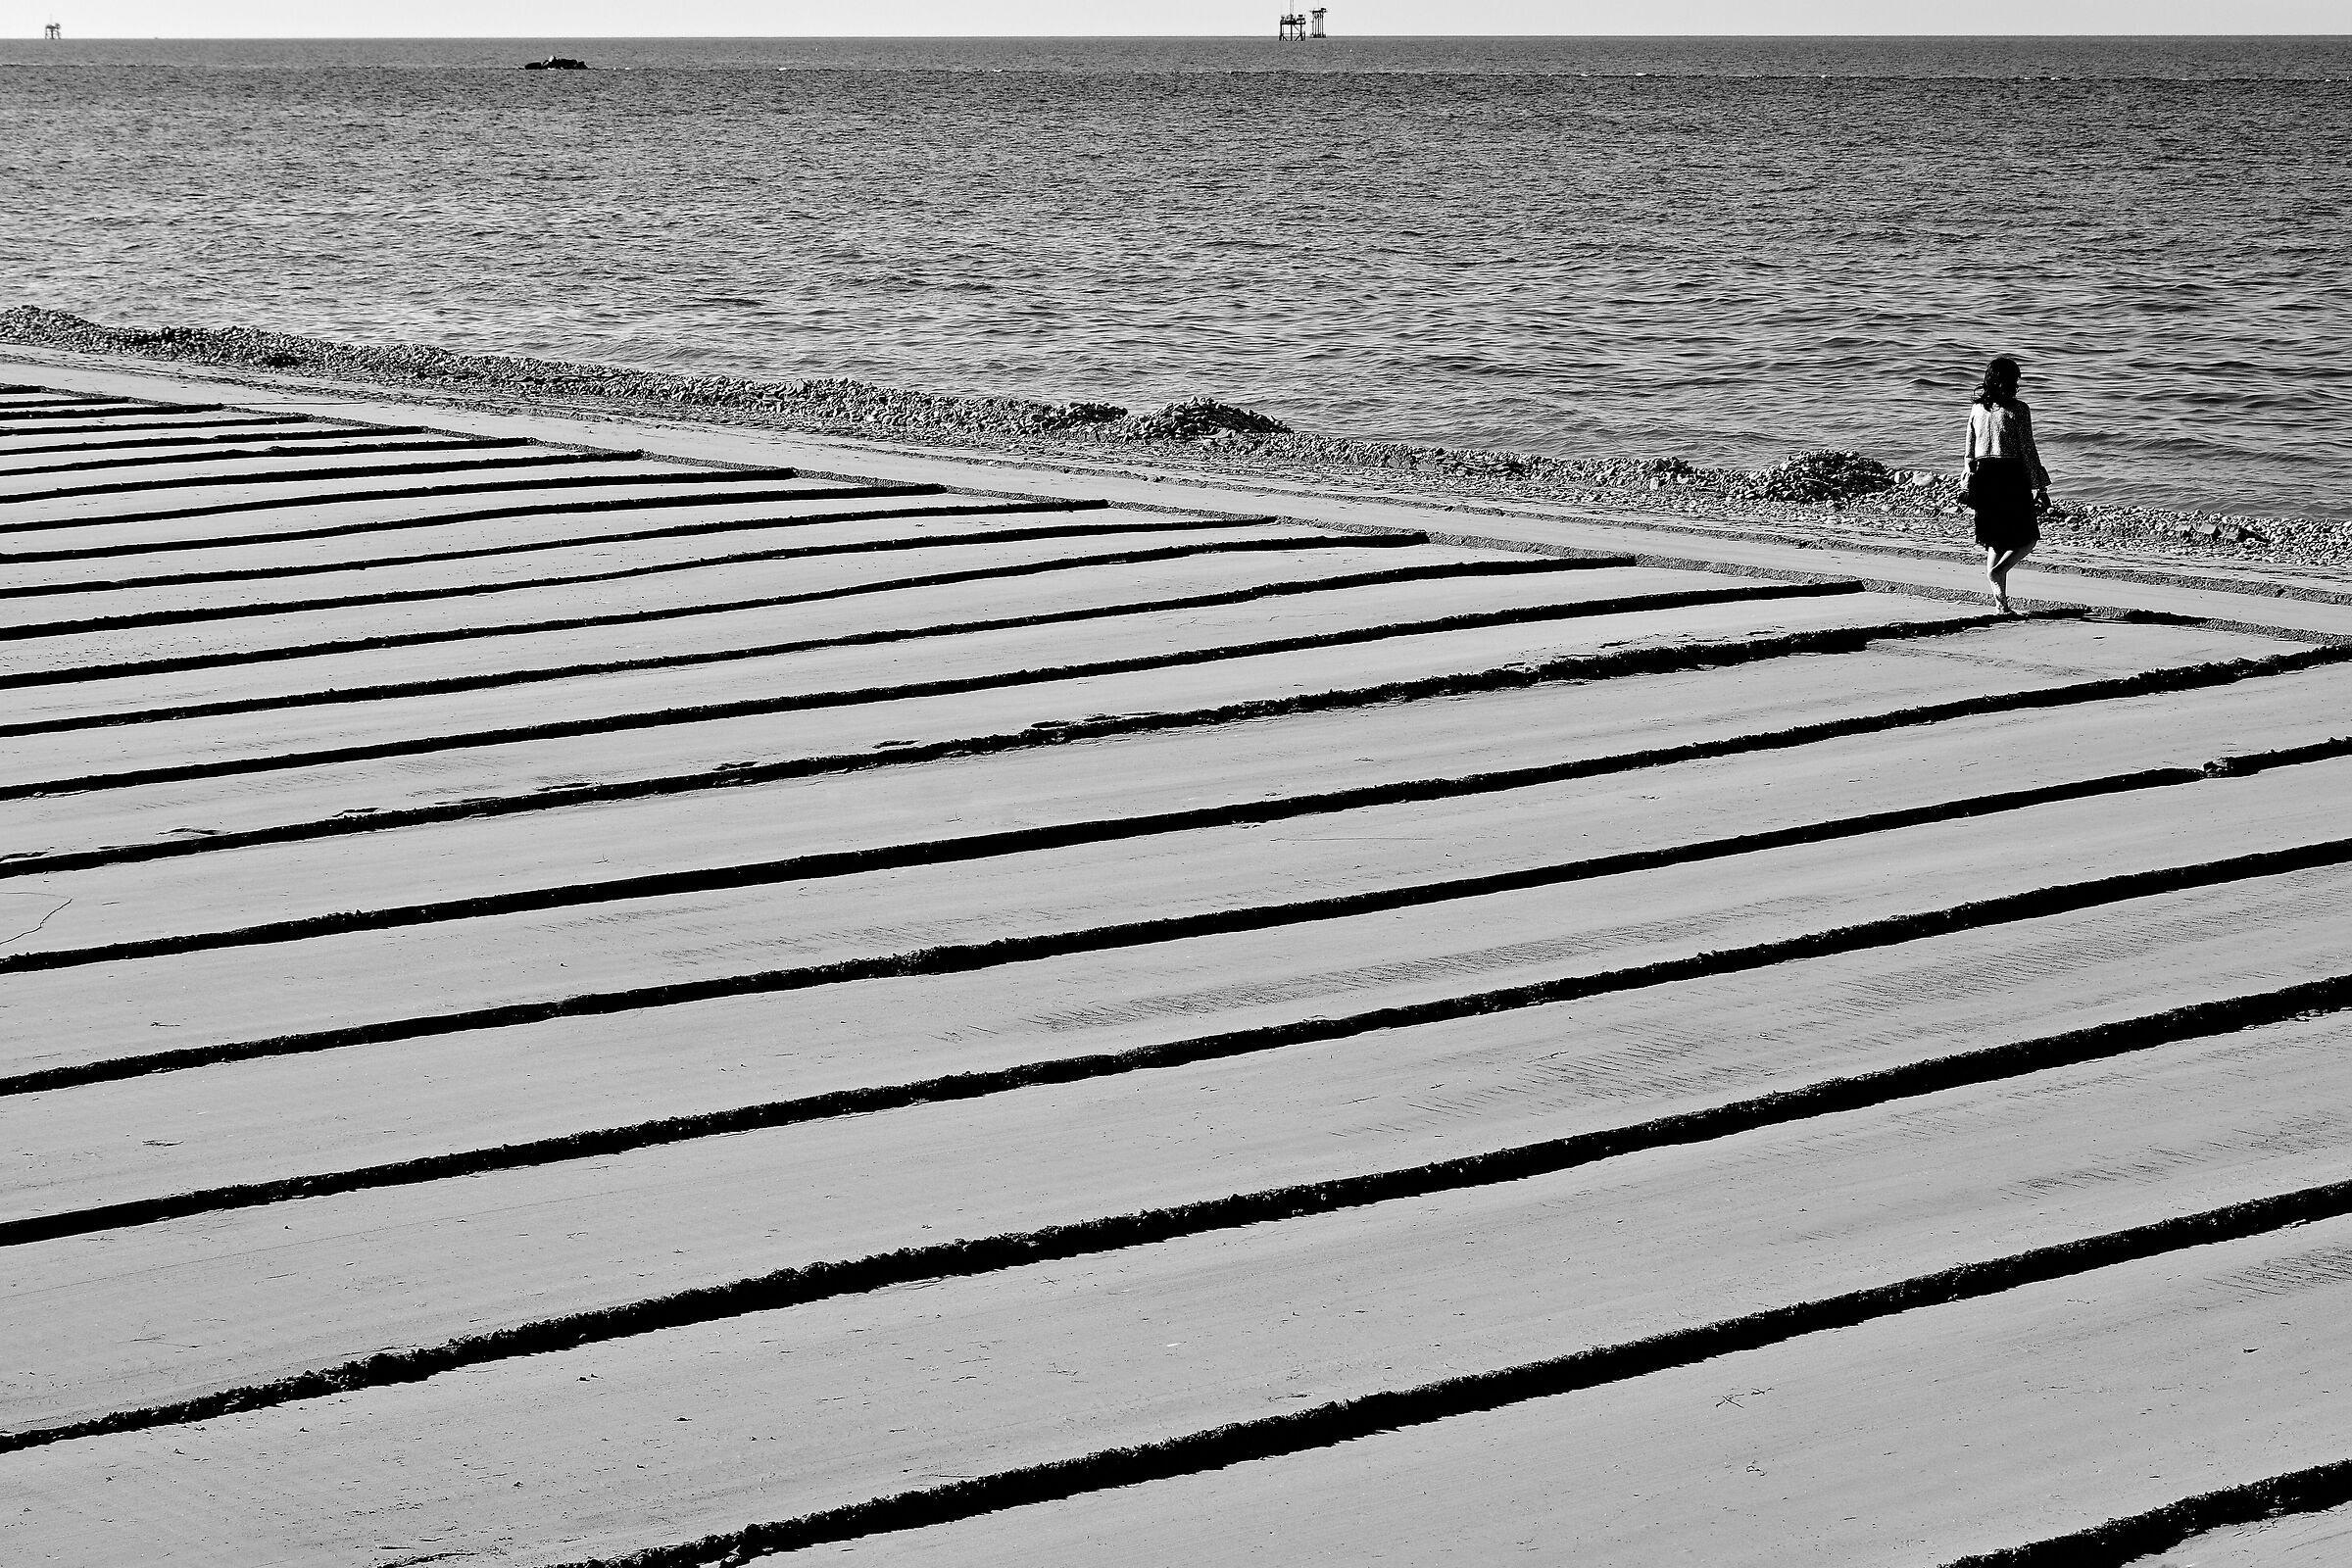 Steps in the sand...